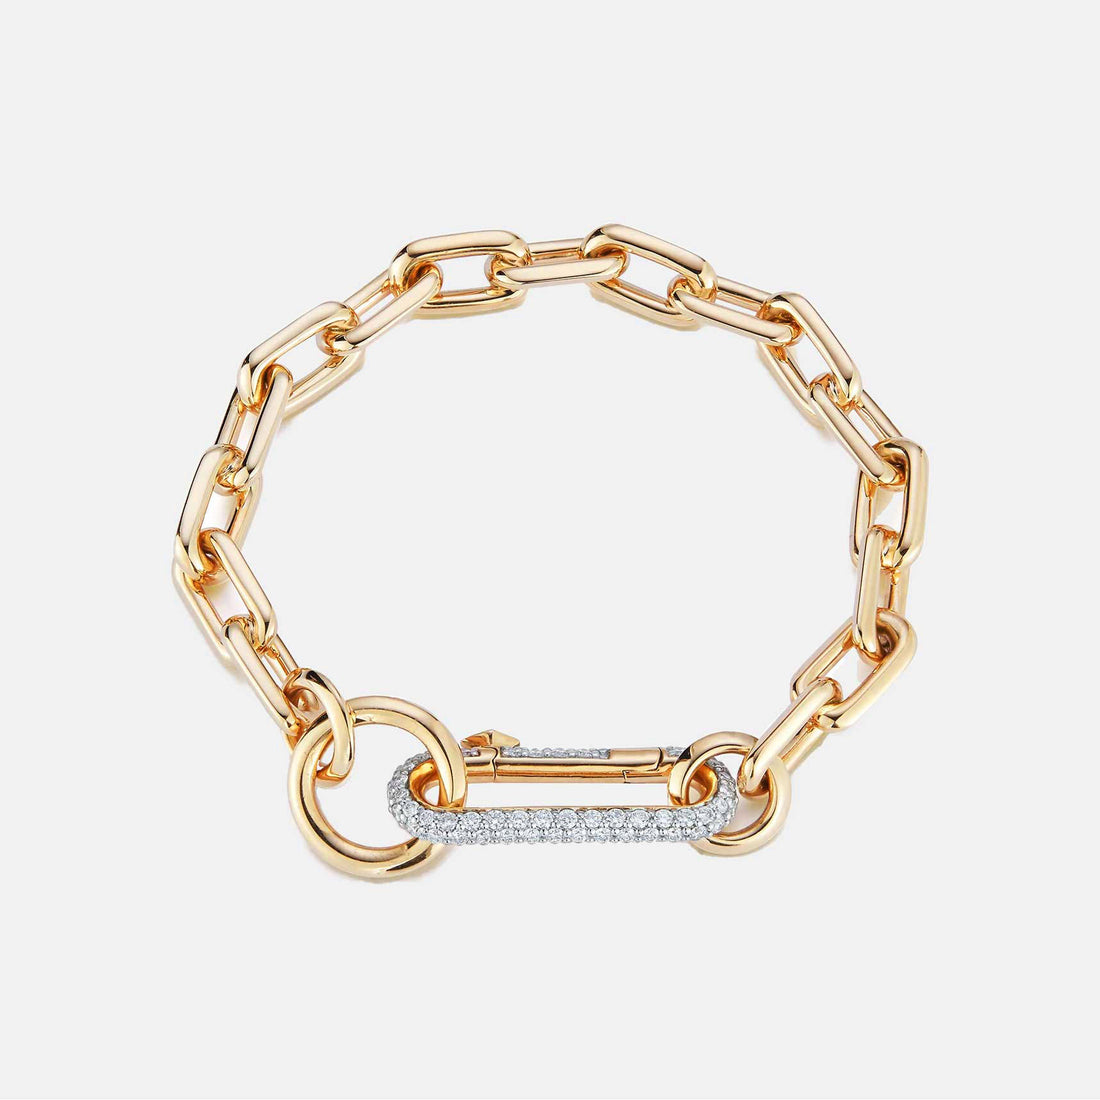 SAXON 18K Yellow GOLD CHAIN LINK BRACELET WITH ELONGATED DIAMOND LINK CLASP